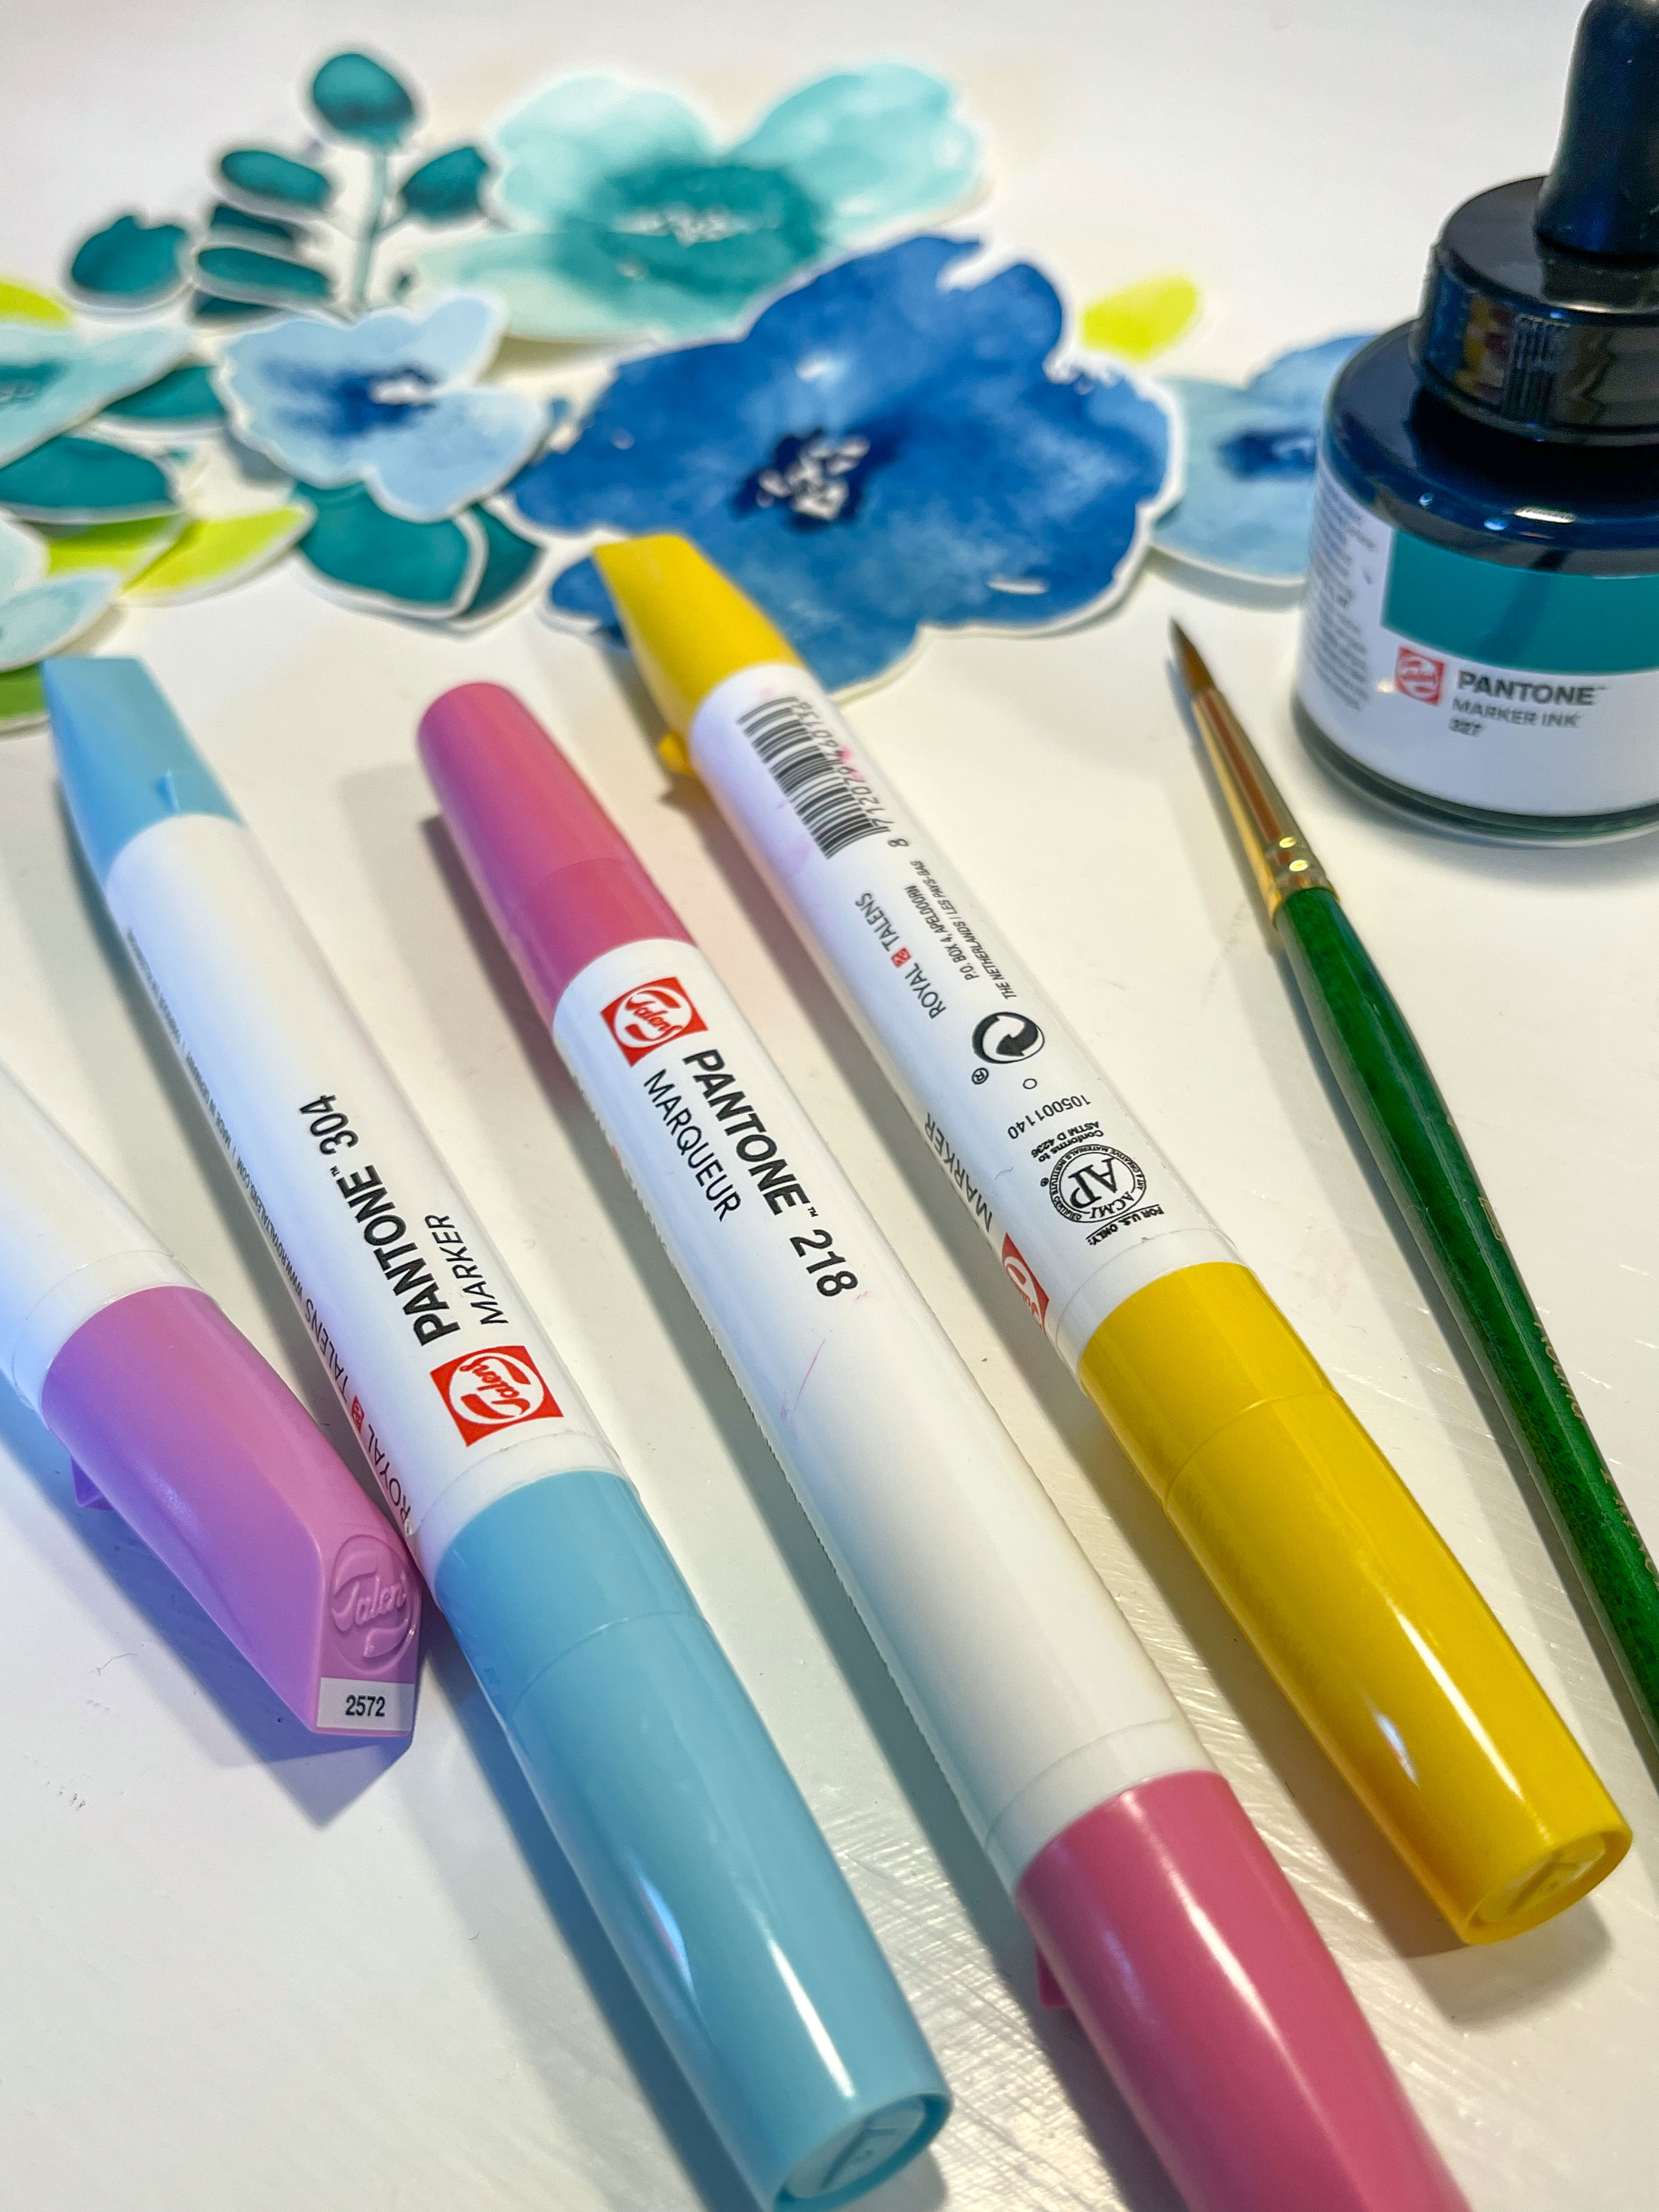 Get Creative with the New Royal Talens Markers by Pantone – Heidi